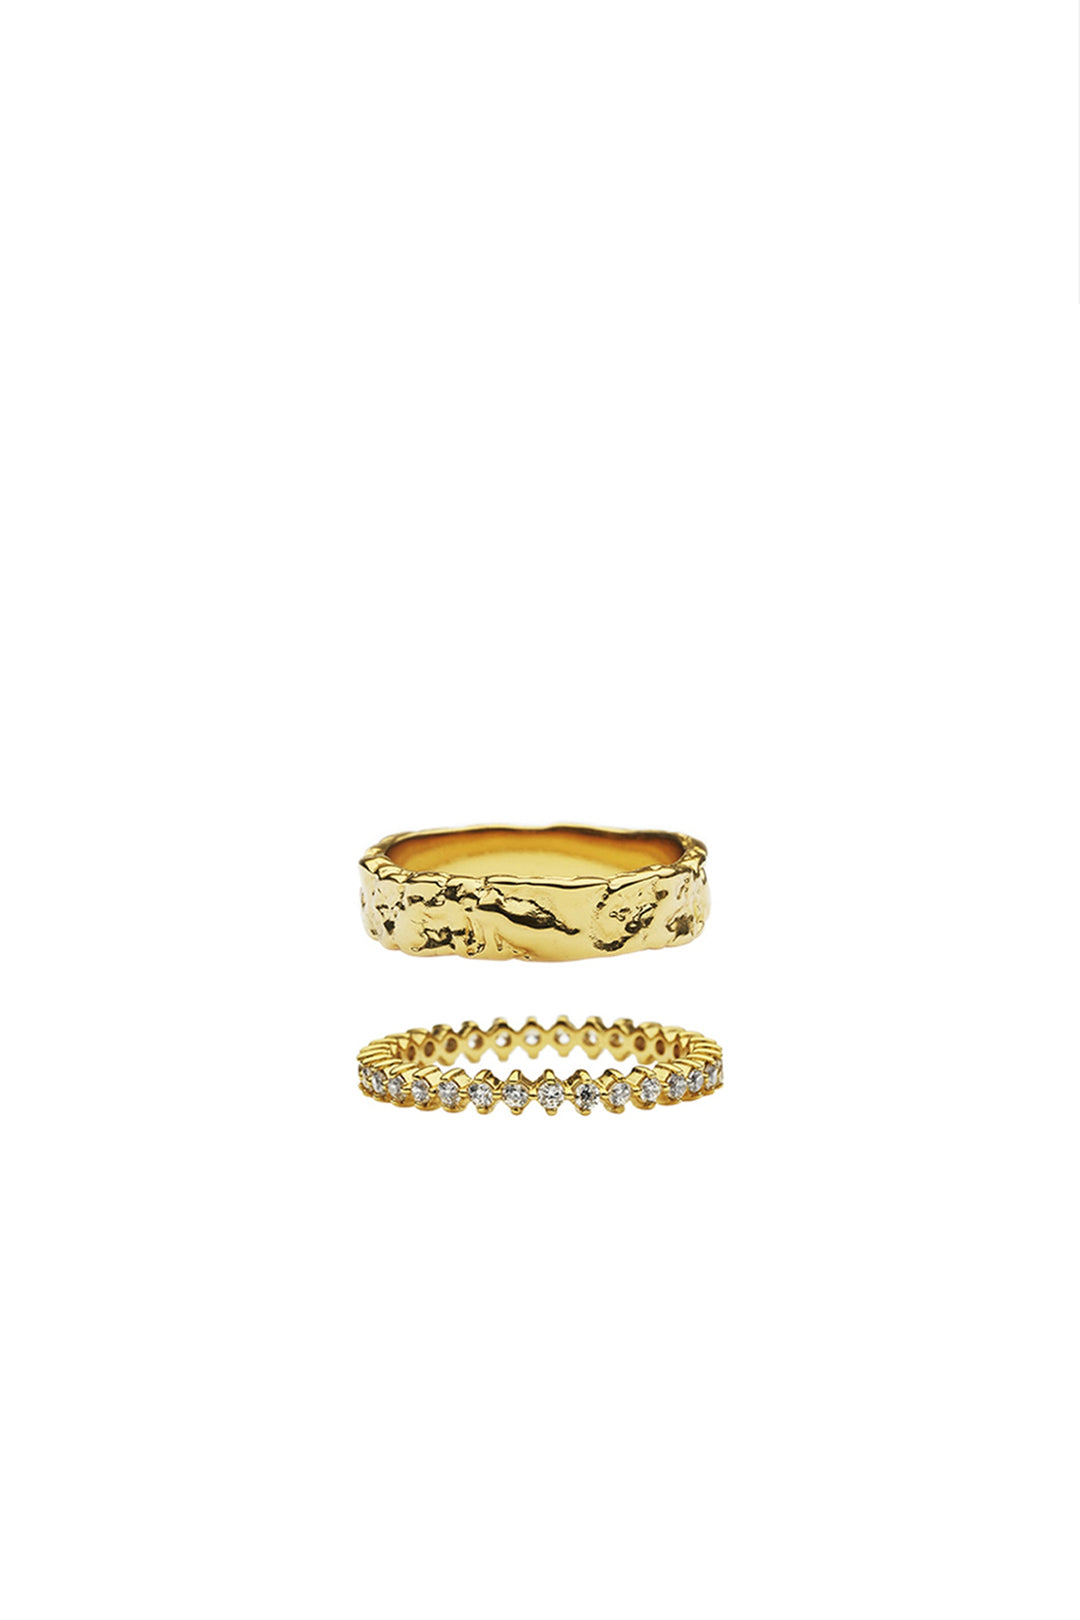 Amber Sceats Electra Rings - Gold